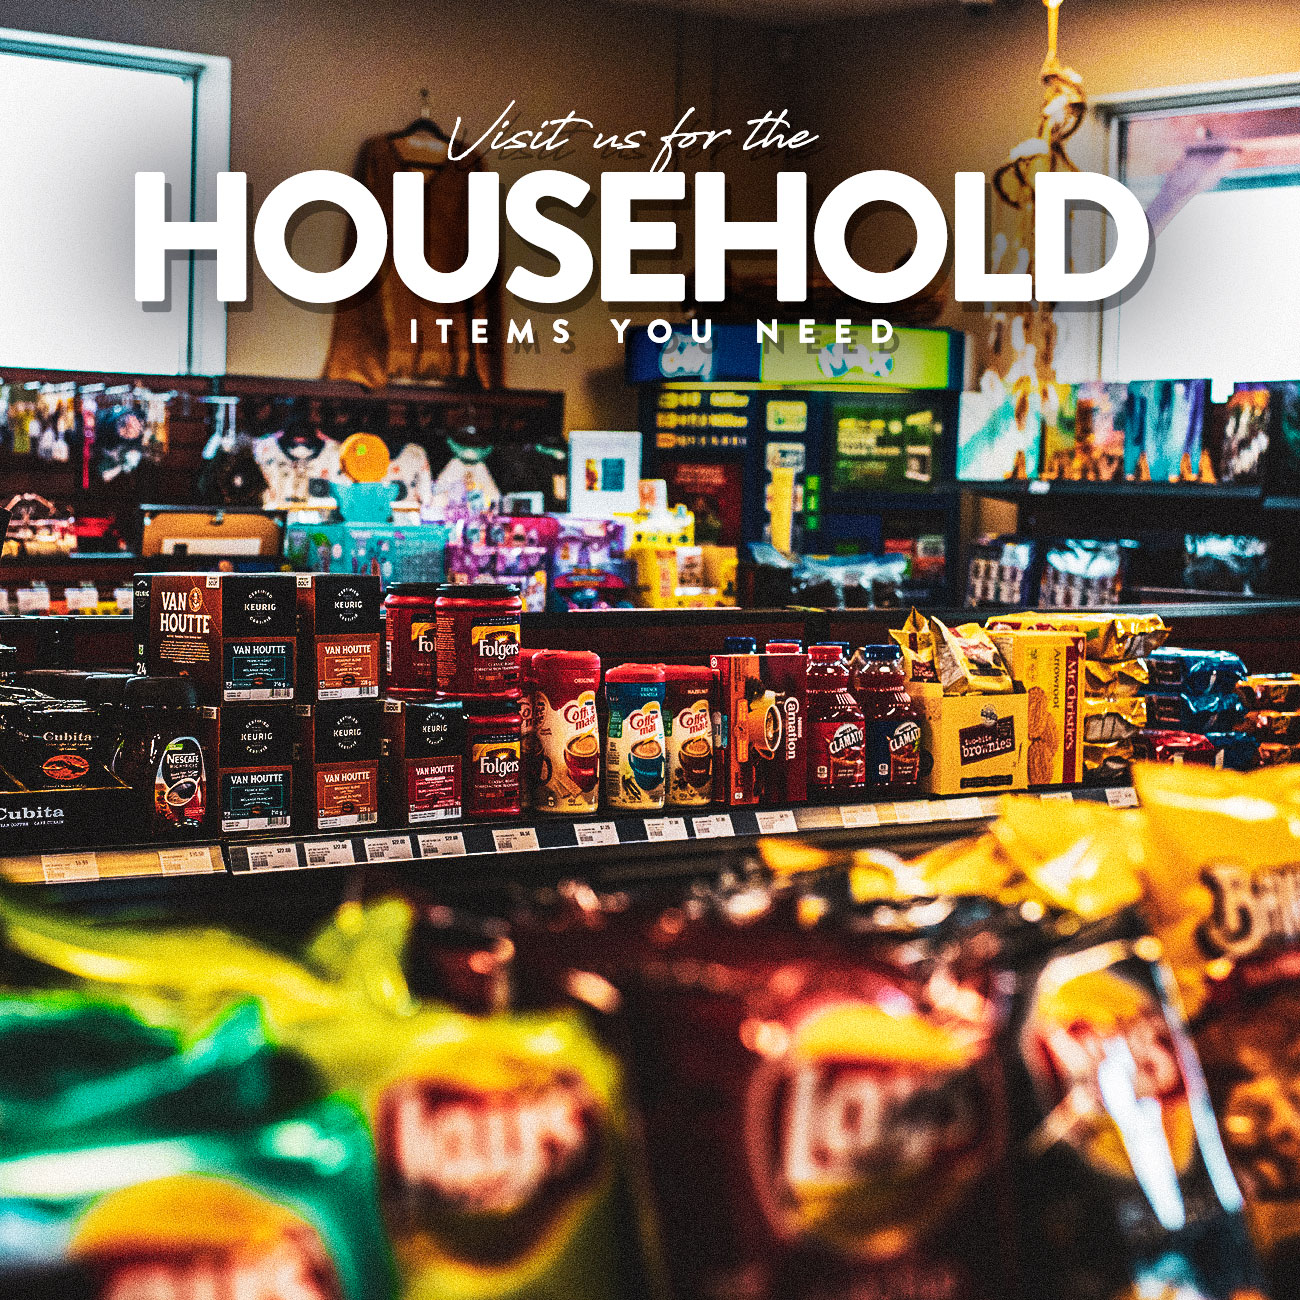 Visit us for the household items you need